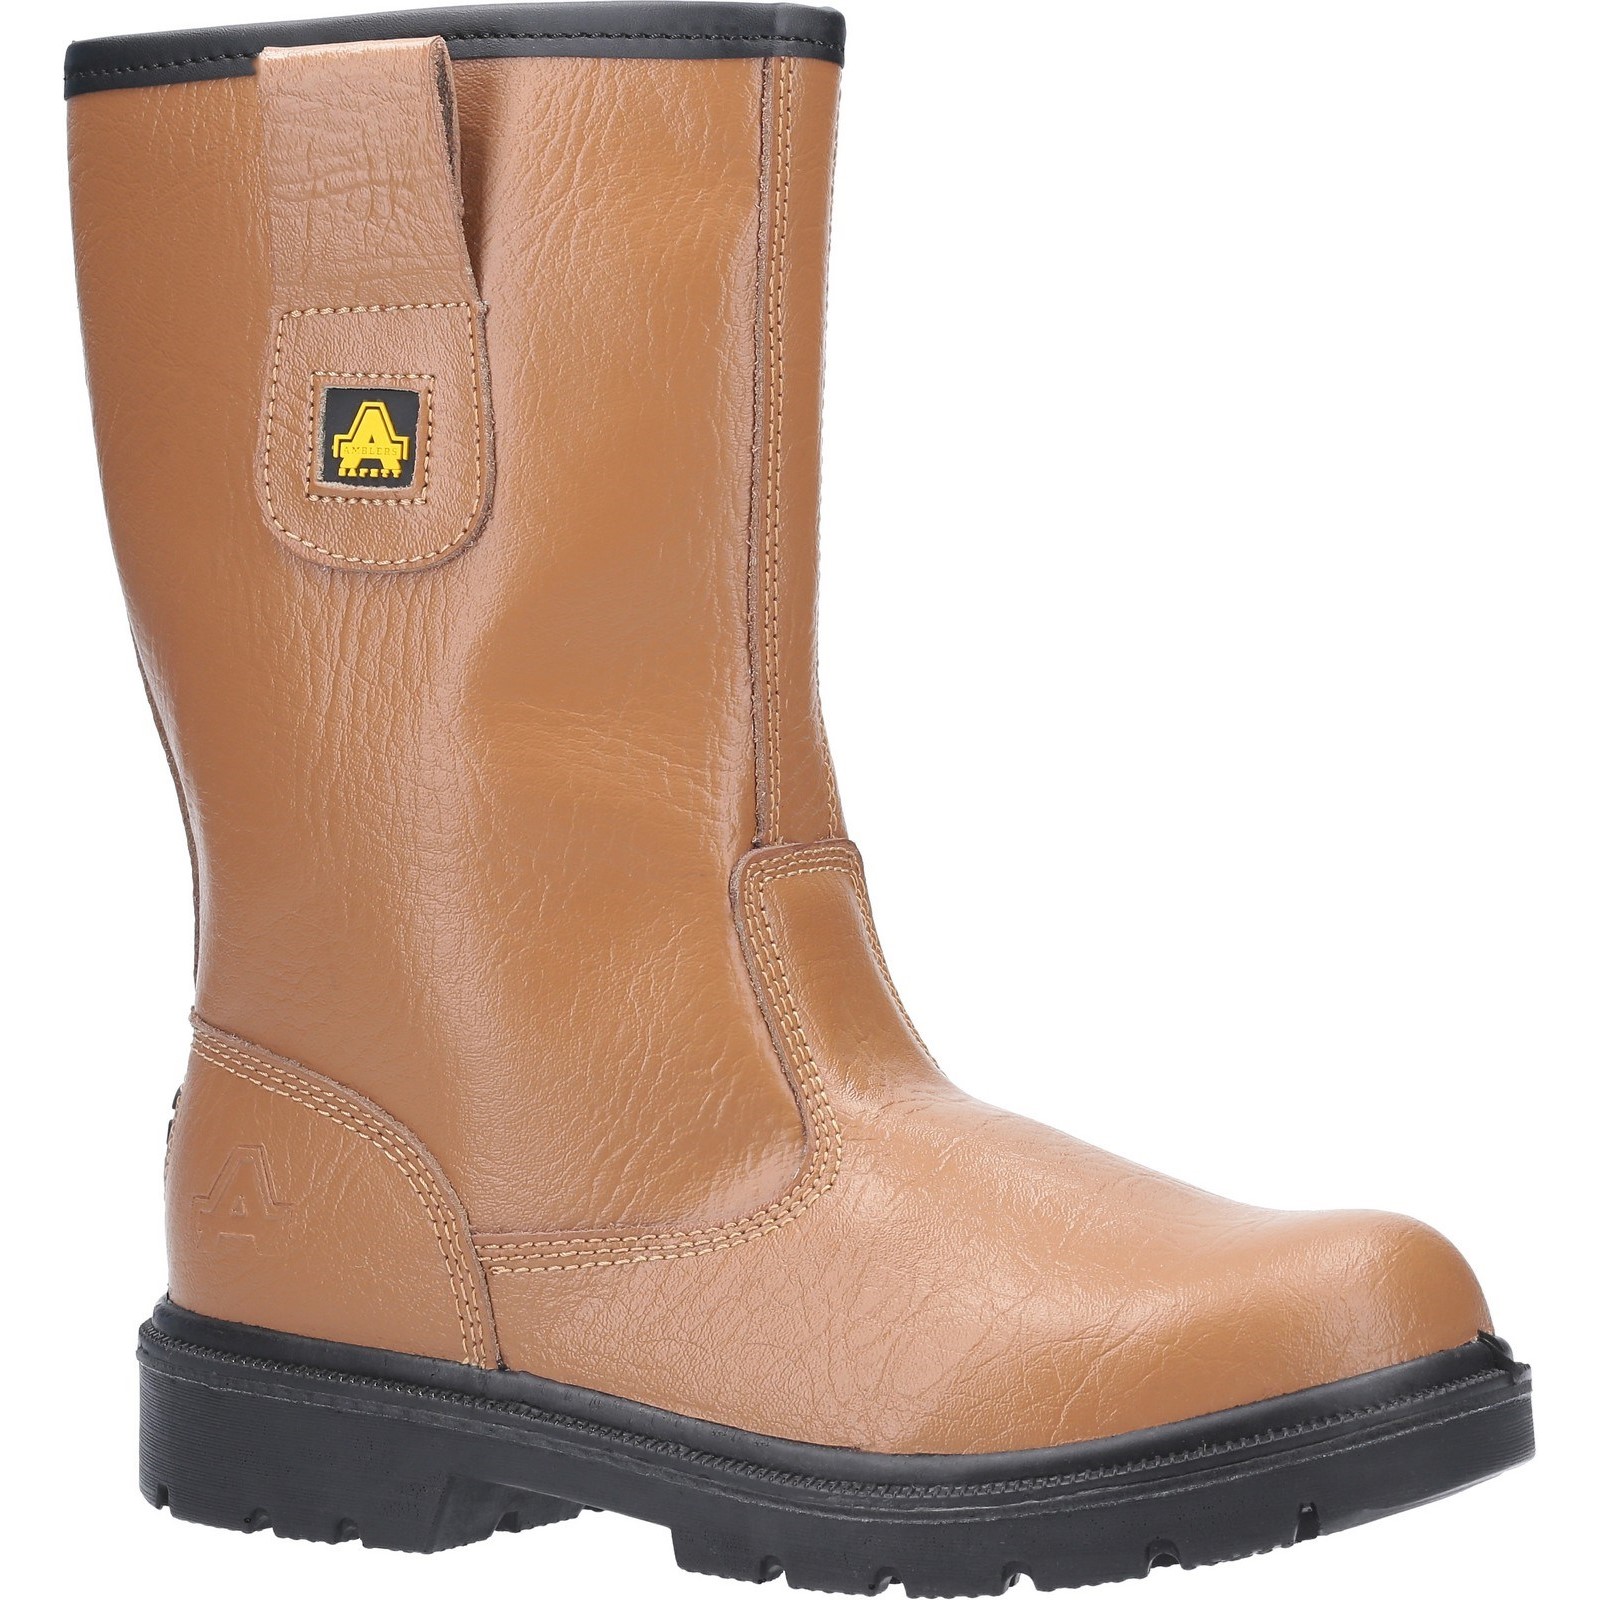 FS124 Water Resistant Pull on Safety Rigger Boot